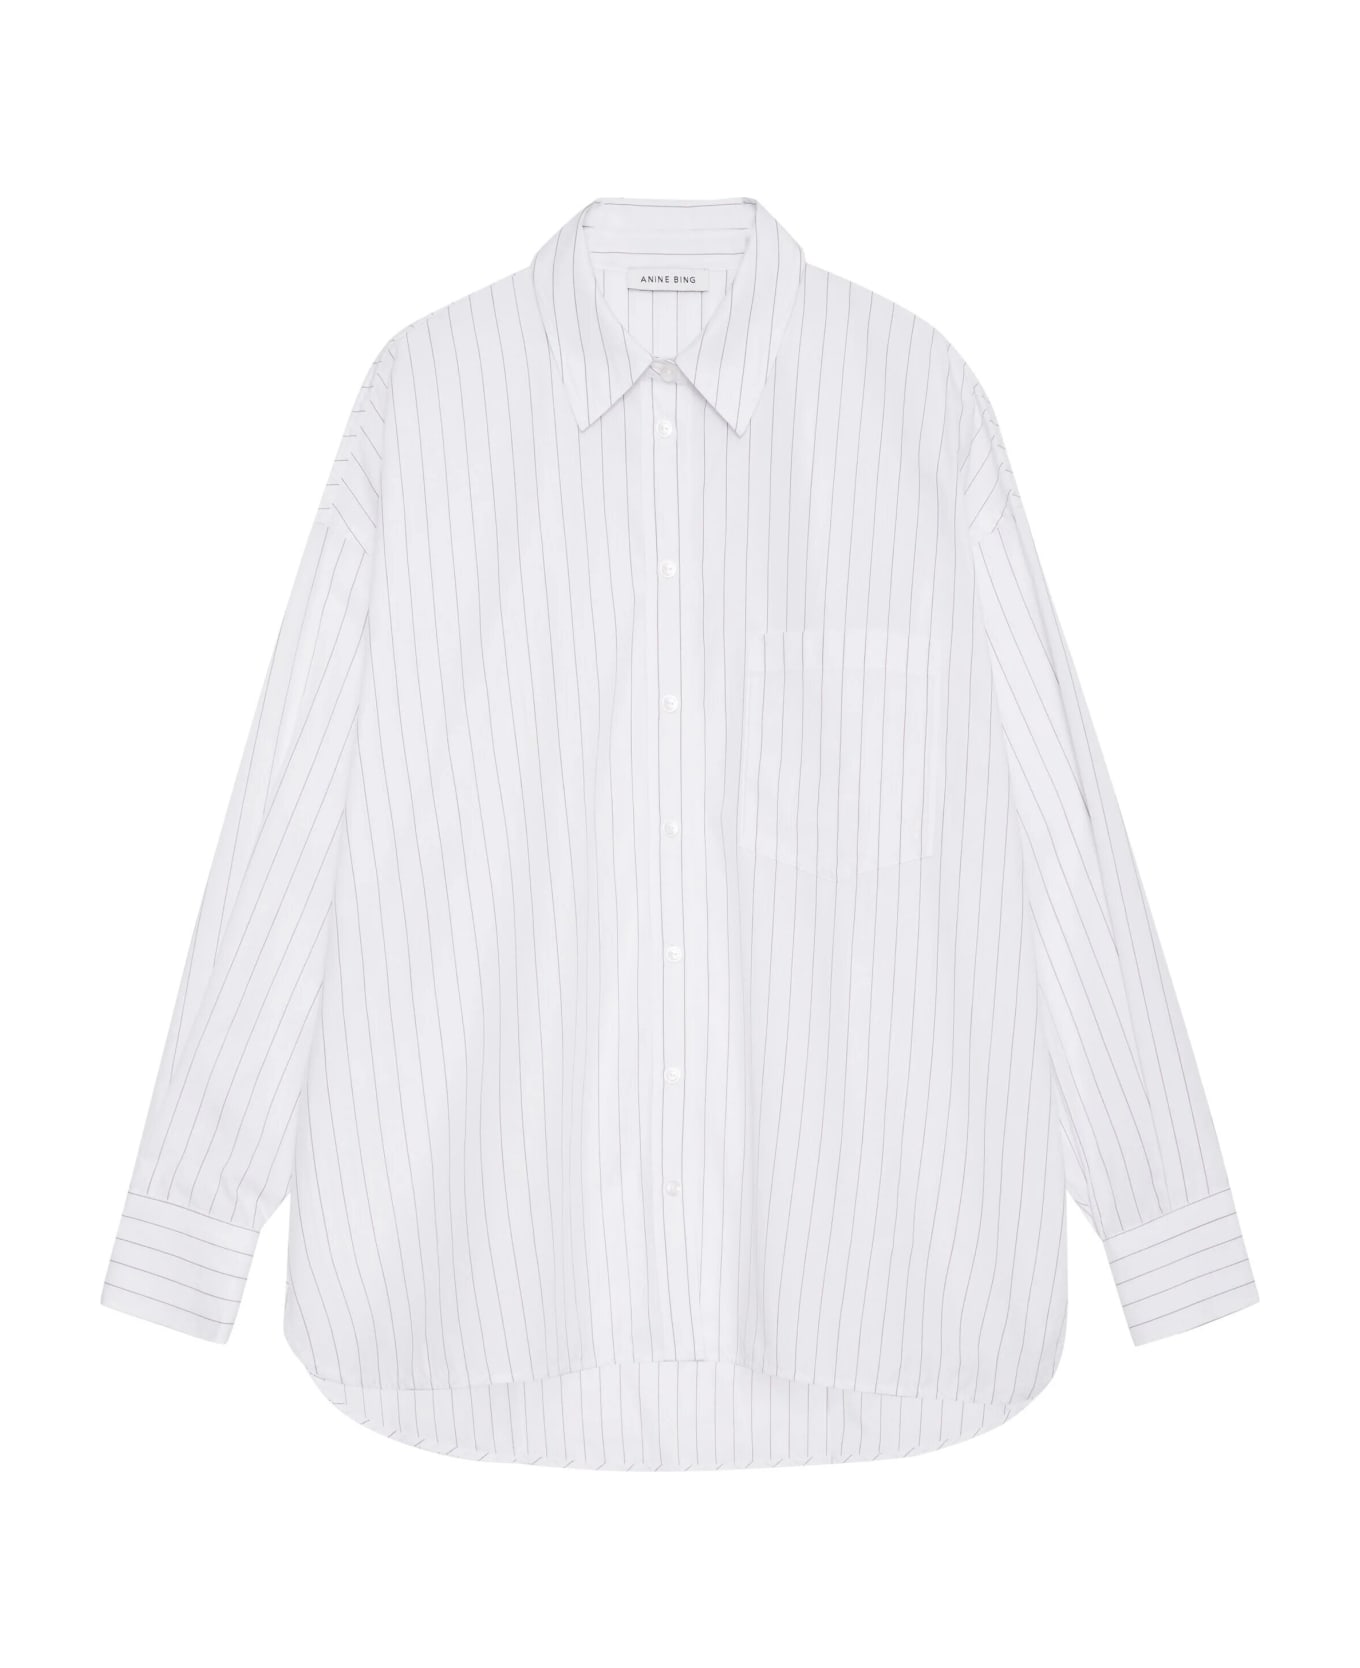 Anine Bing Chrissy Shirt Stripe - White And Taupe